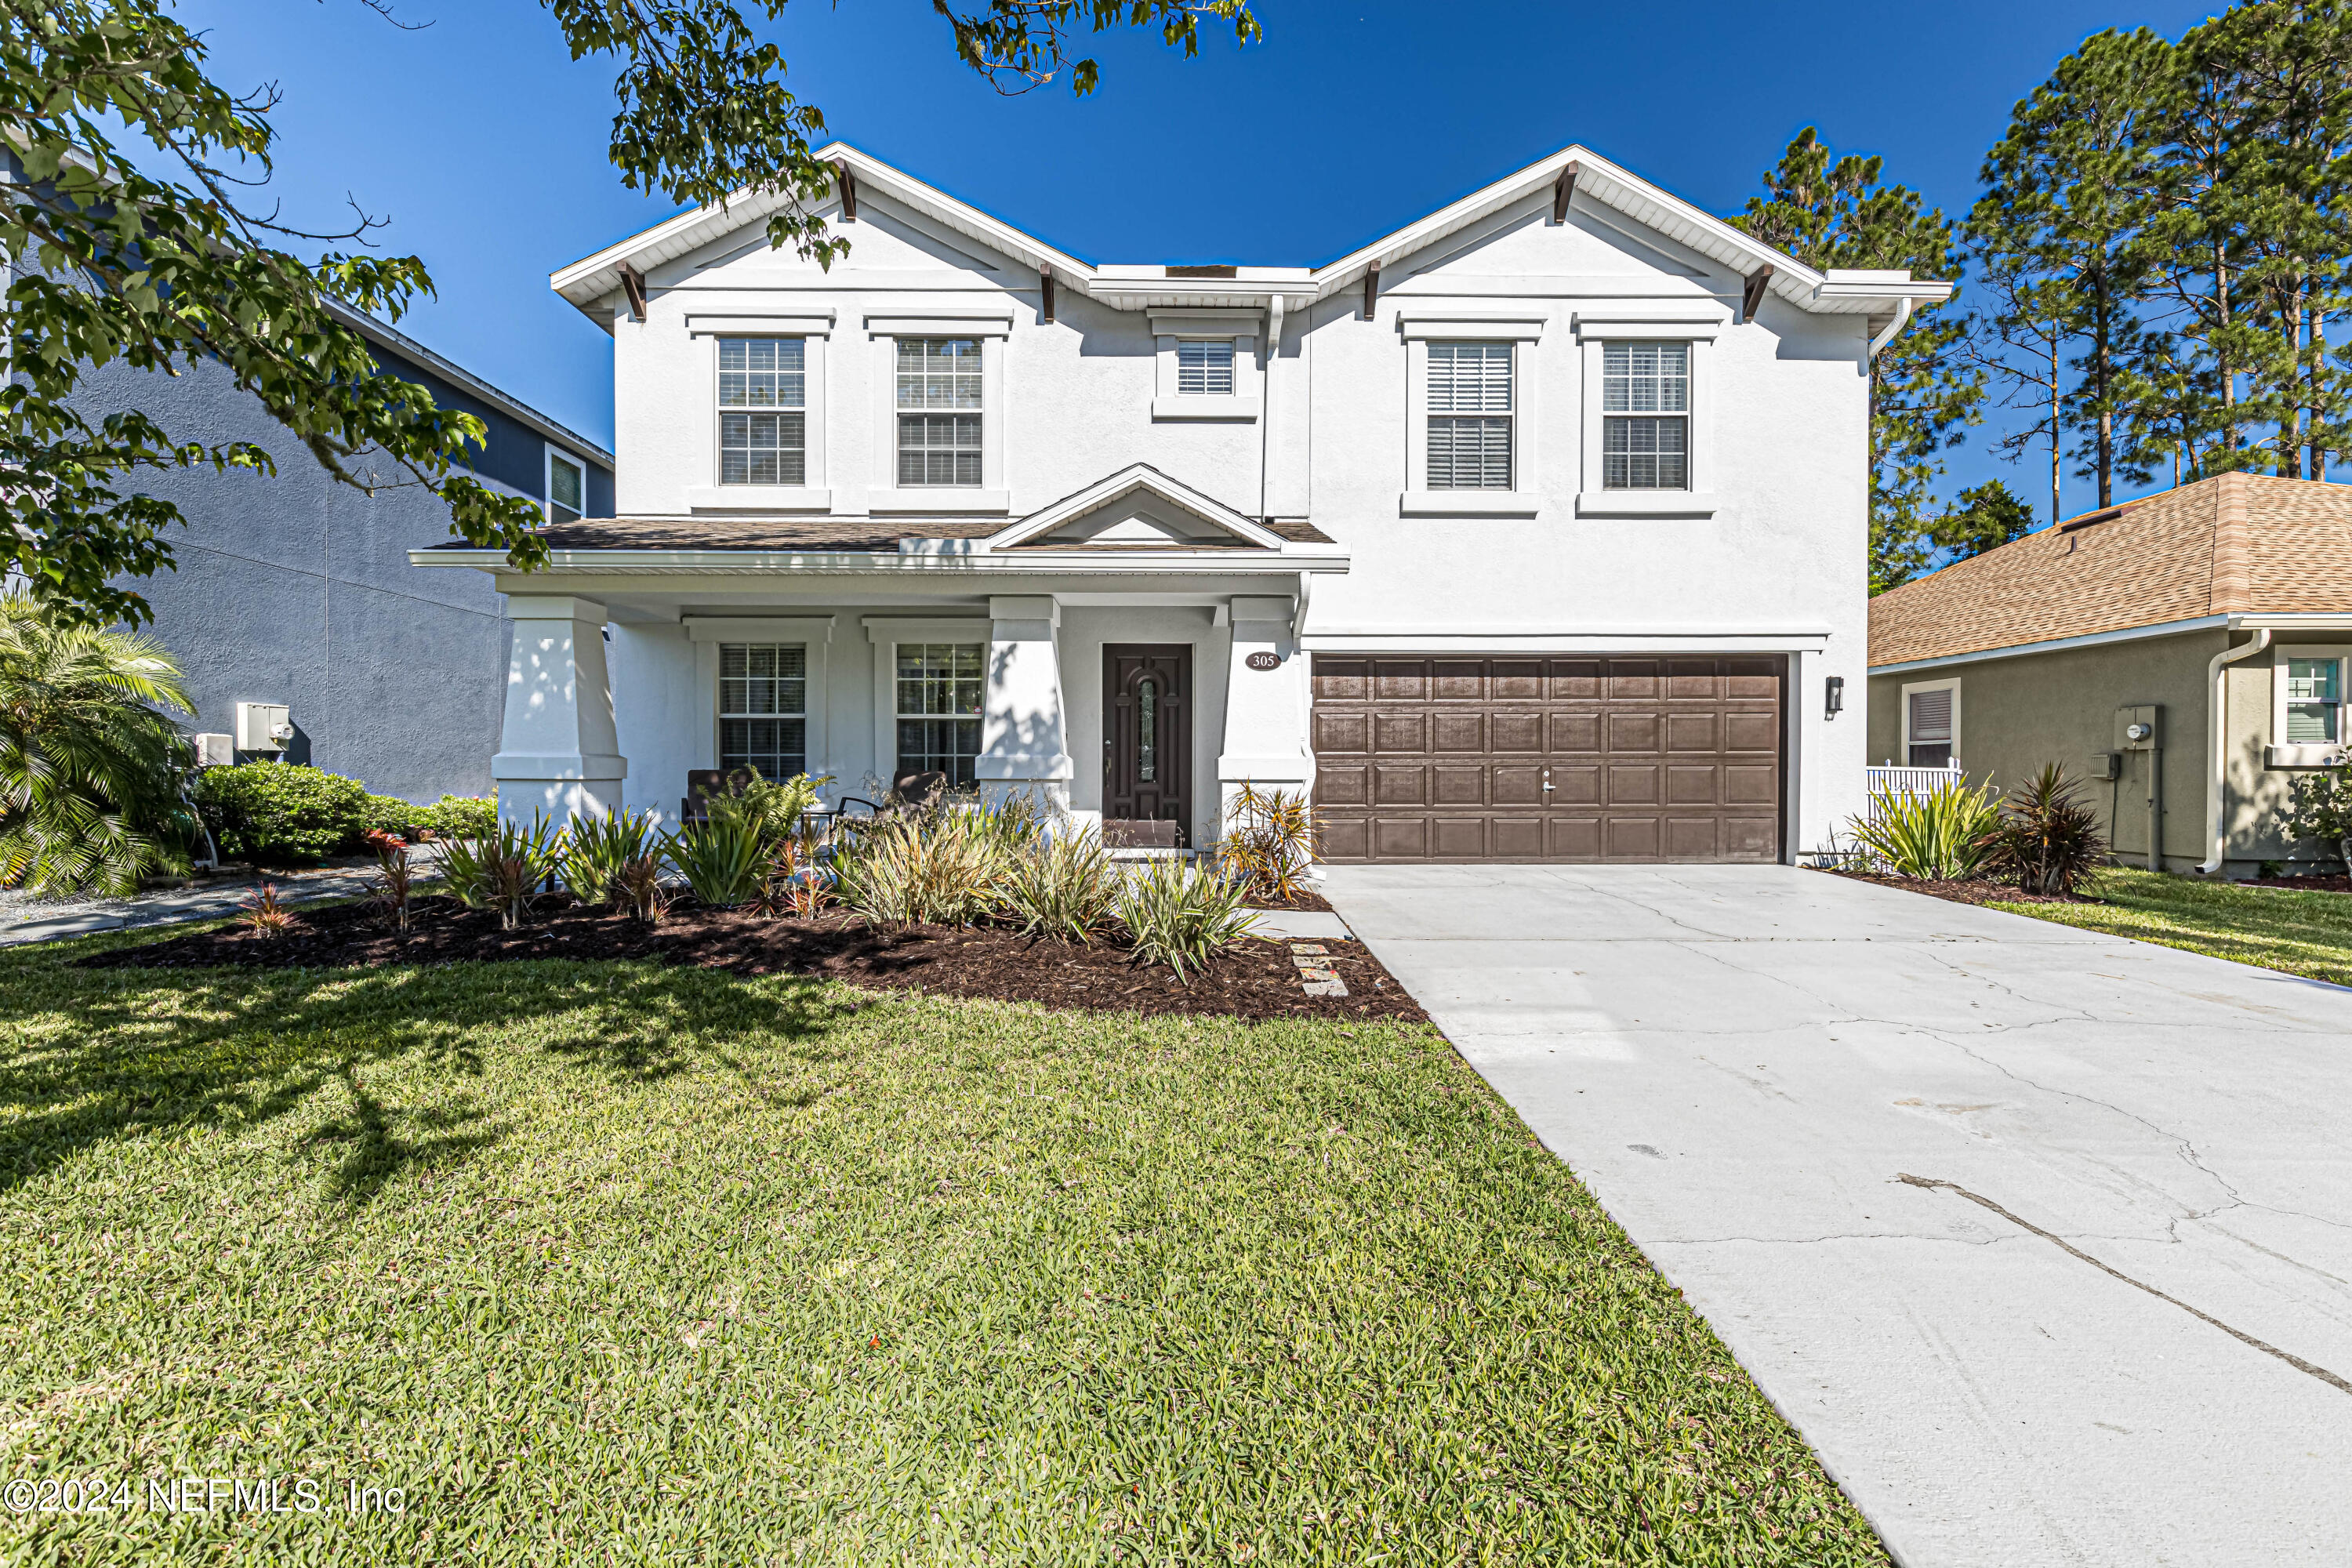 St Johns, FL home for sale located at 305 Carriage Hill Court, St Johns, FL 32259